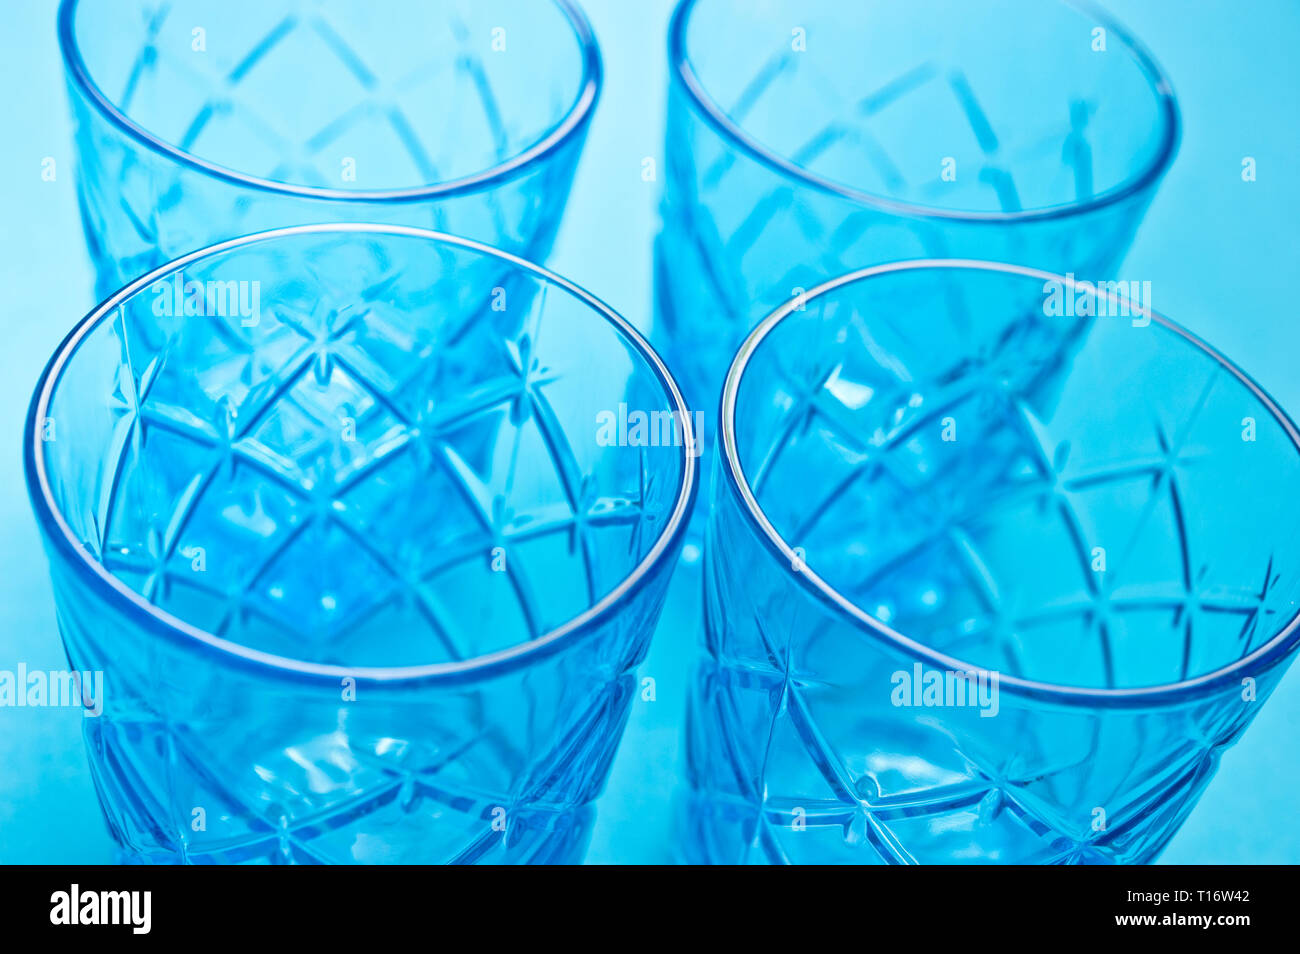 pattern of glass thumblers Stock Photo